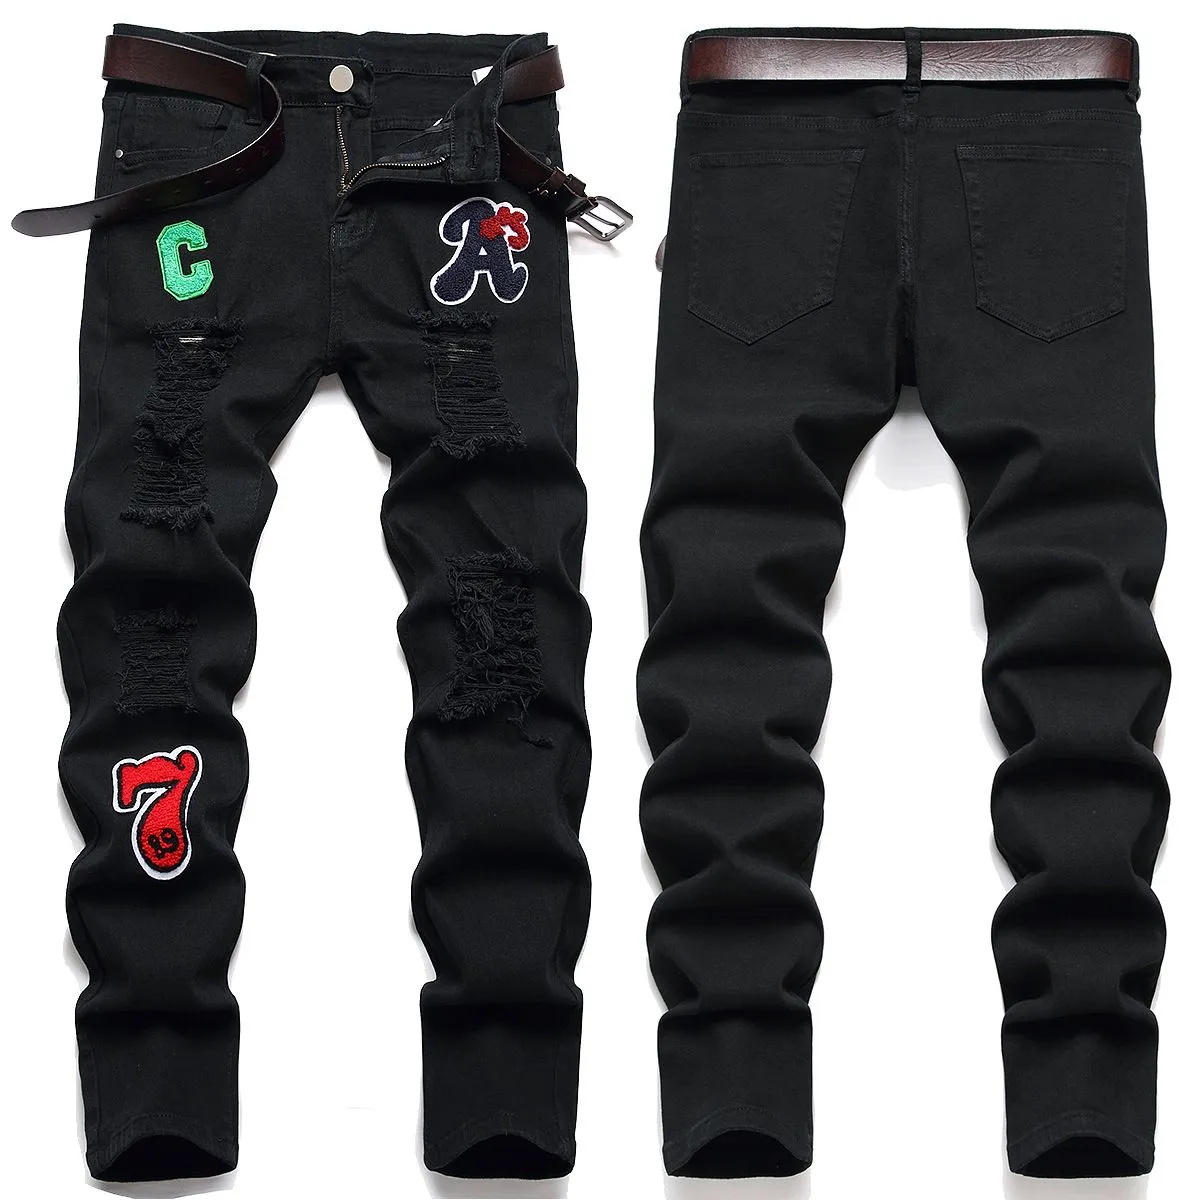 Men`s Jeans Patterned Micro-Elastic Black Pants Selected High-Quality Fabric Slim Straight Tube